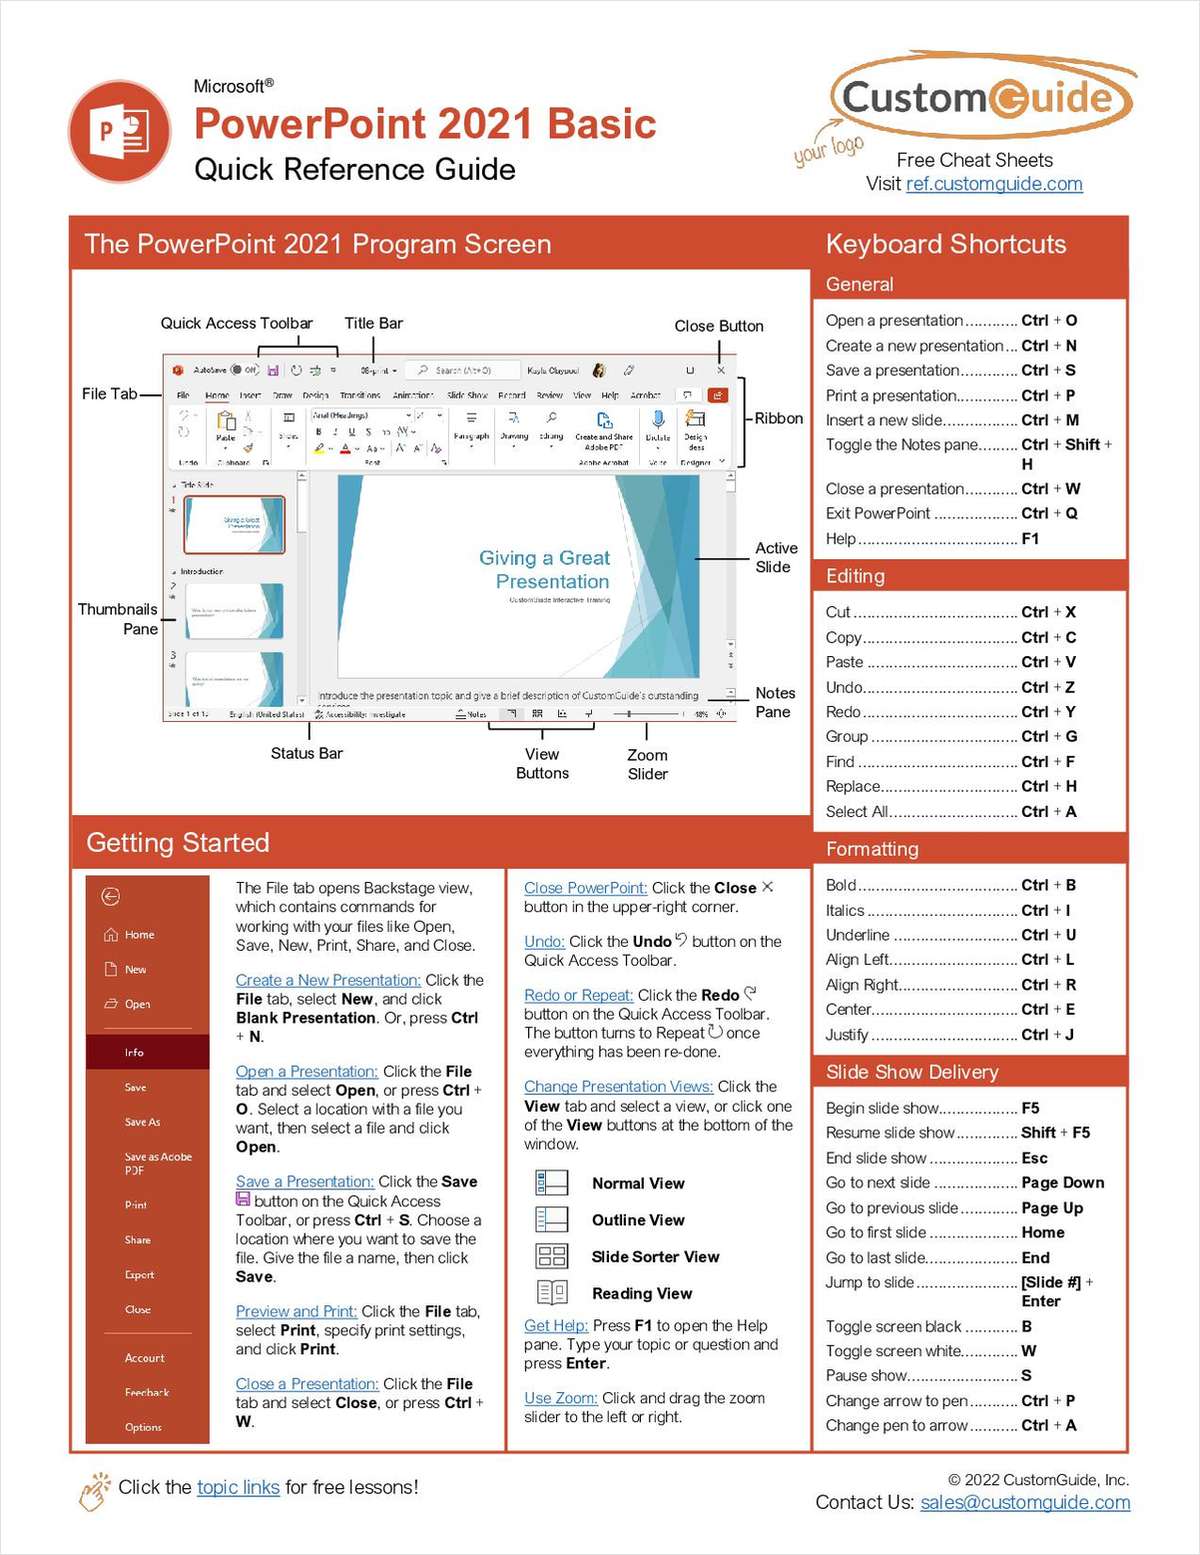 Microsoft PowerPoint 2021 Basic - Quick Reference Card